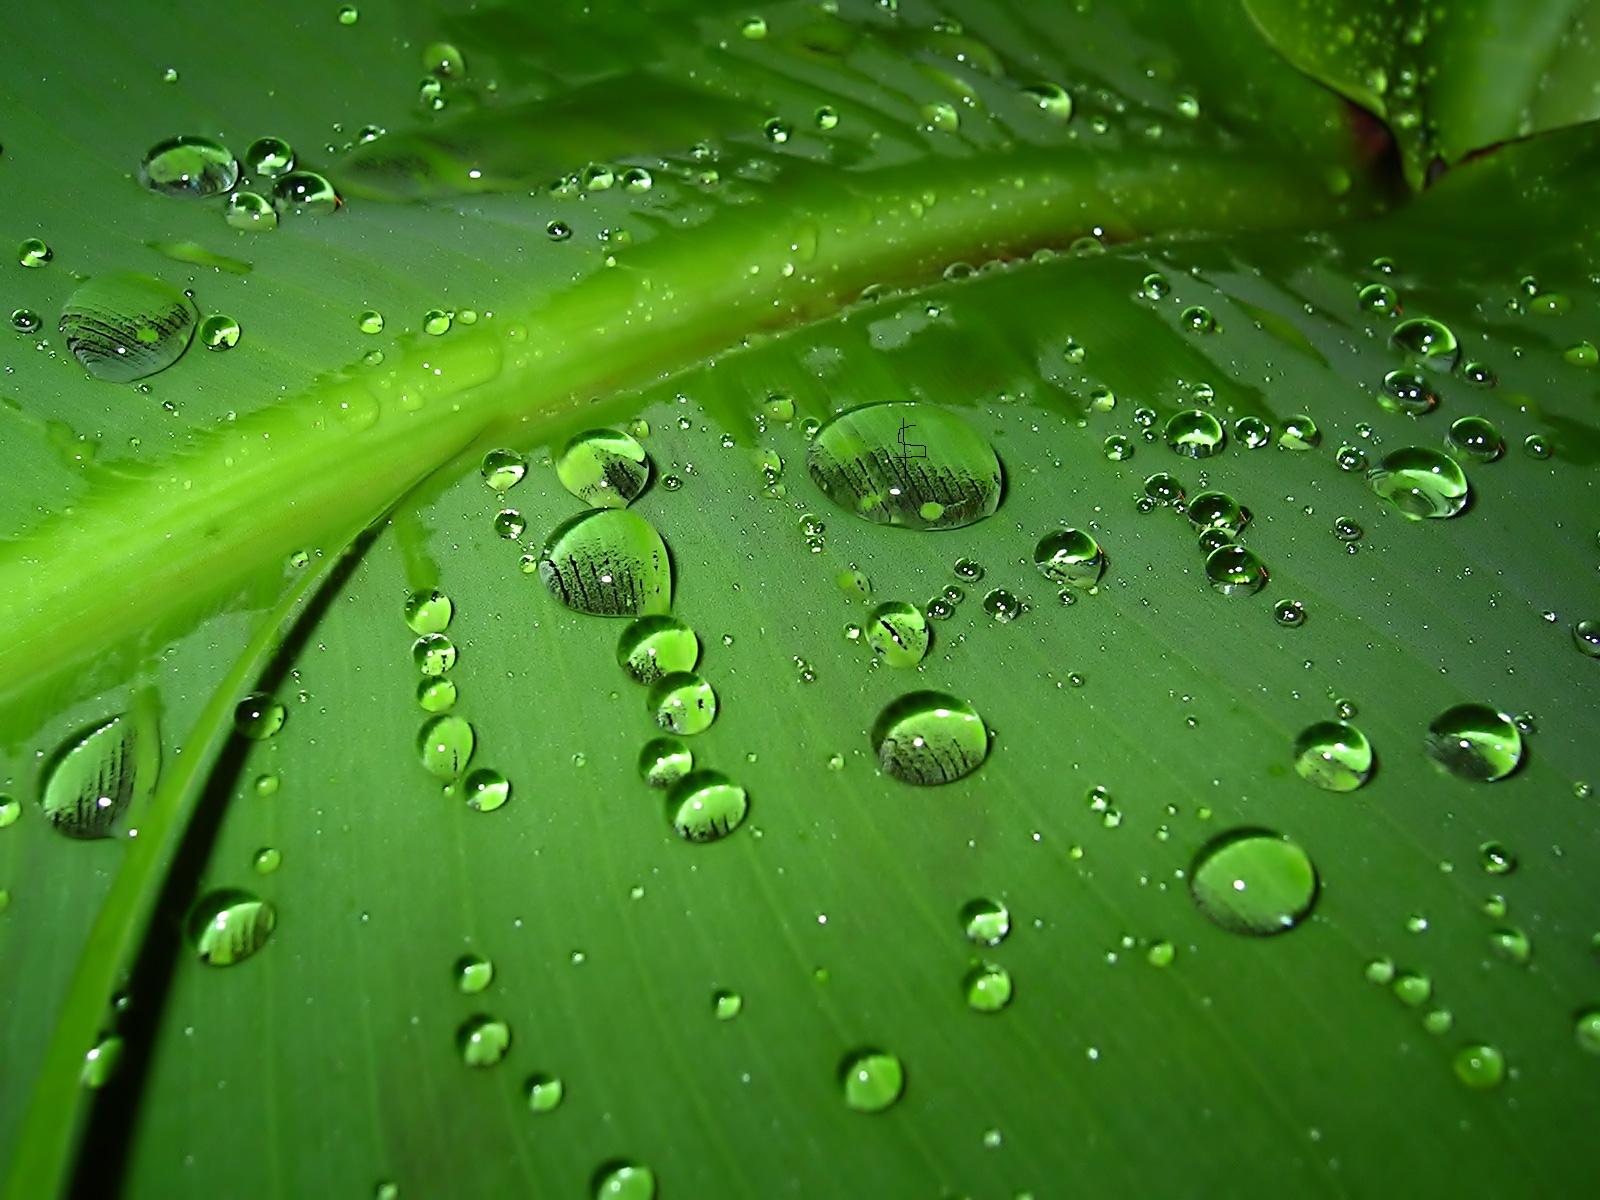 Water Droplets On Leaves HD Wallpaper | Nature Wallpapers